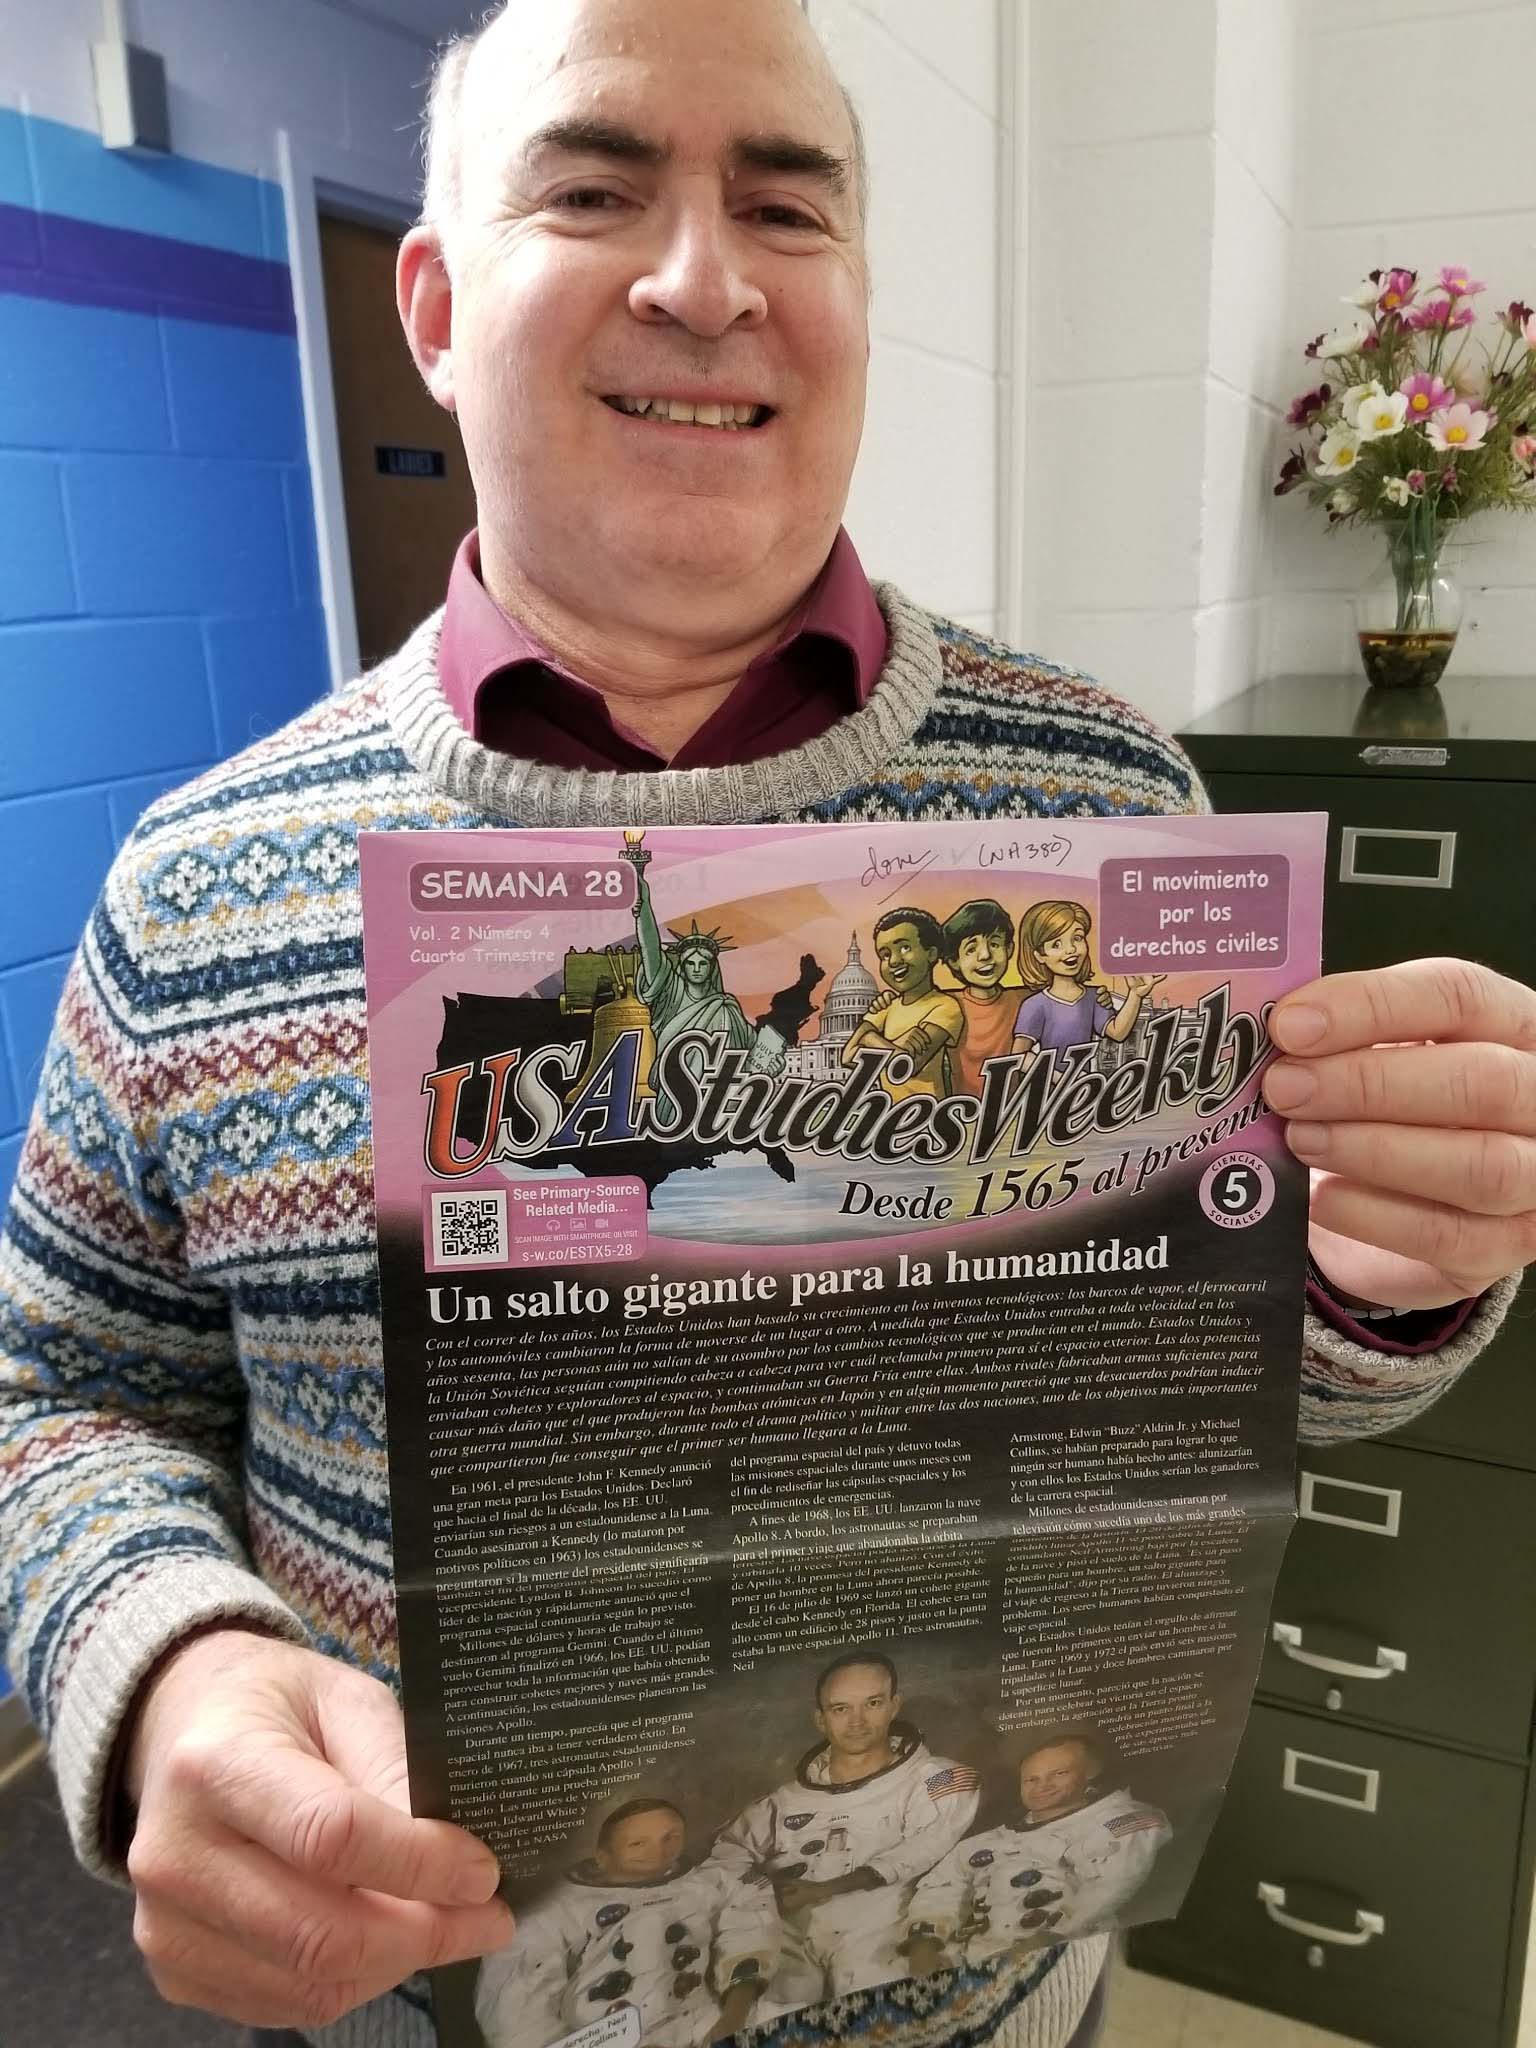 Volunteer David Alper enjoyed reading the Weekly Readers!  In this photo, he is smiling a big smile and holding up a fifth-grade copy about the 1969 moon landing